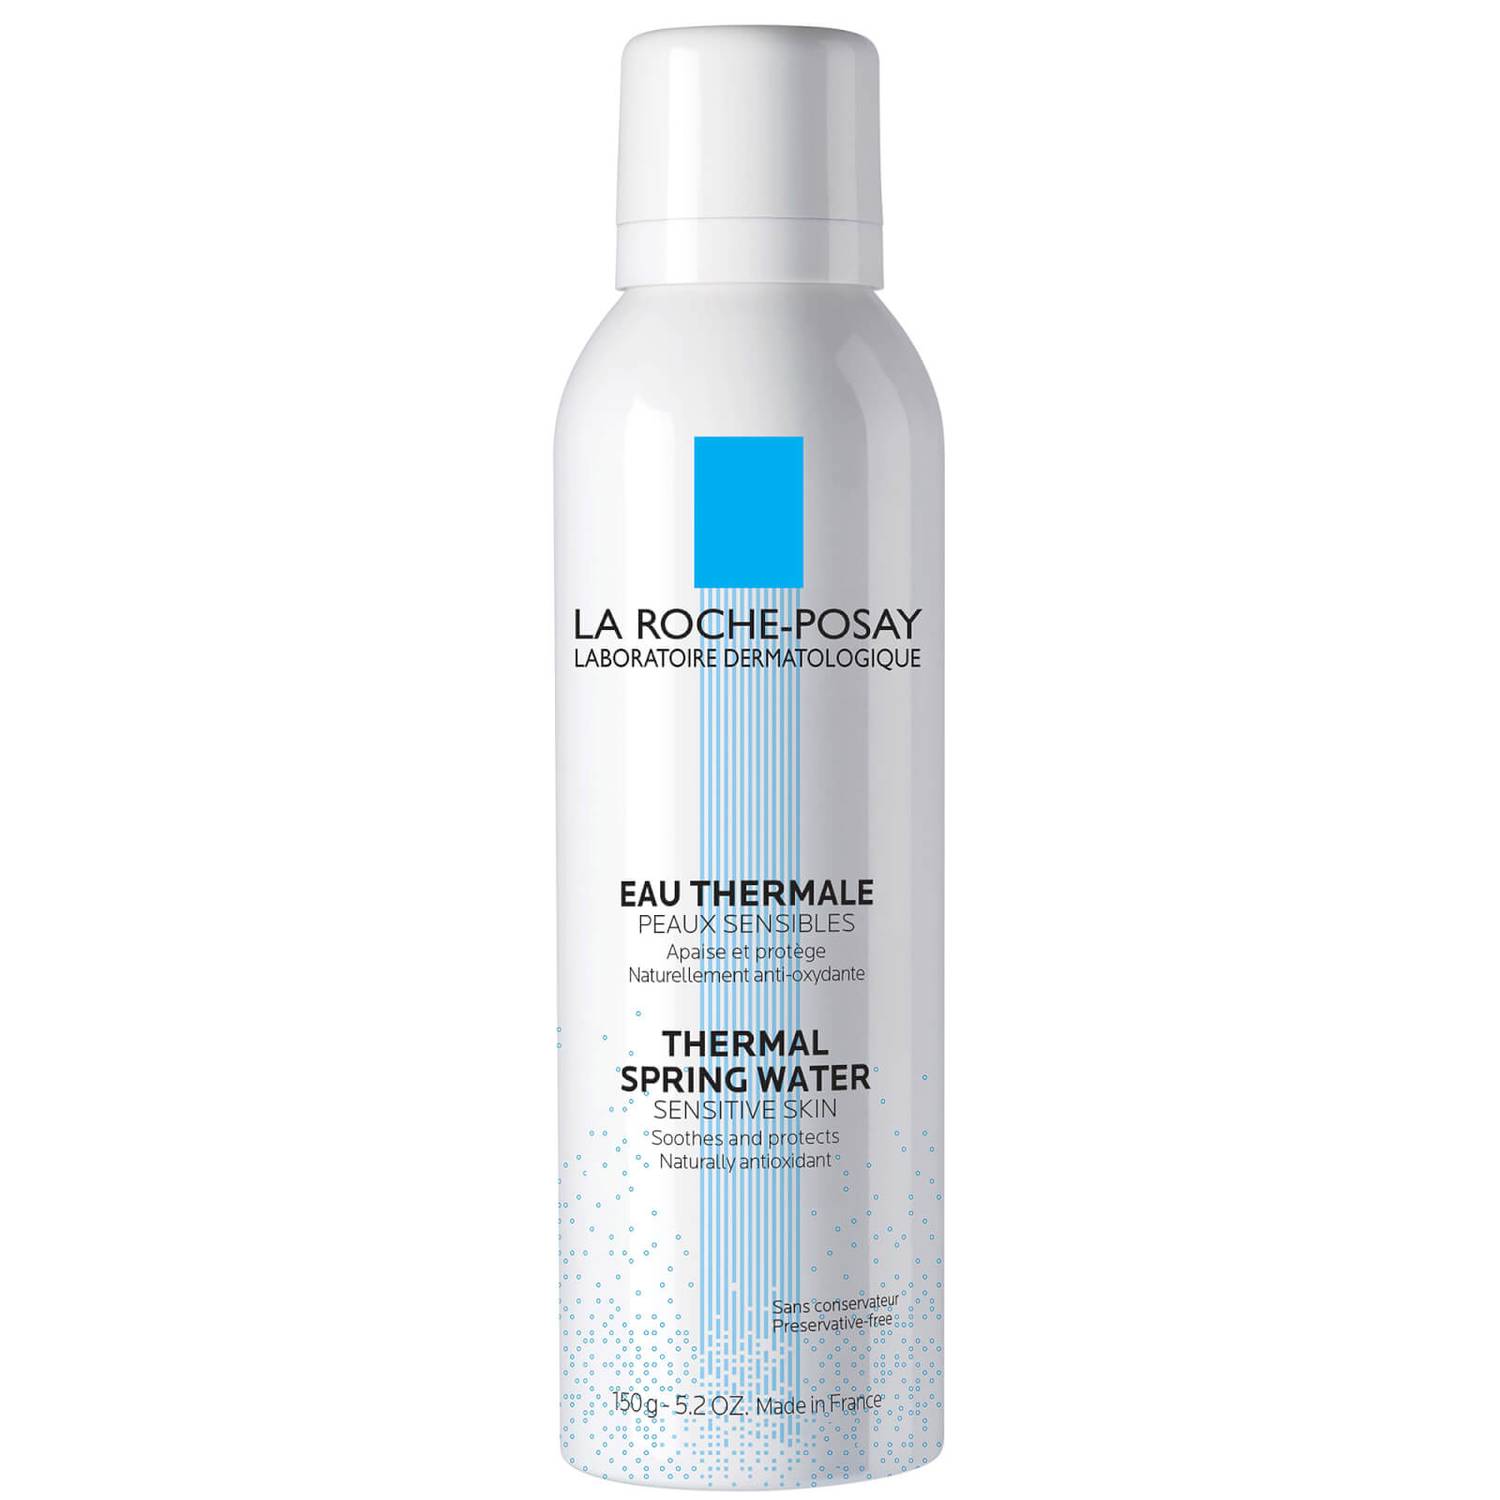 La Roche-Posay Thermal Spring Water Face Spray - 150g